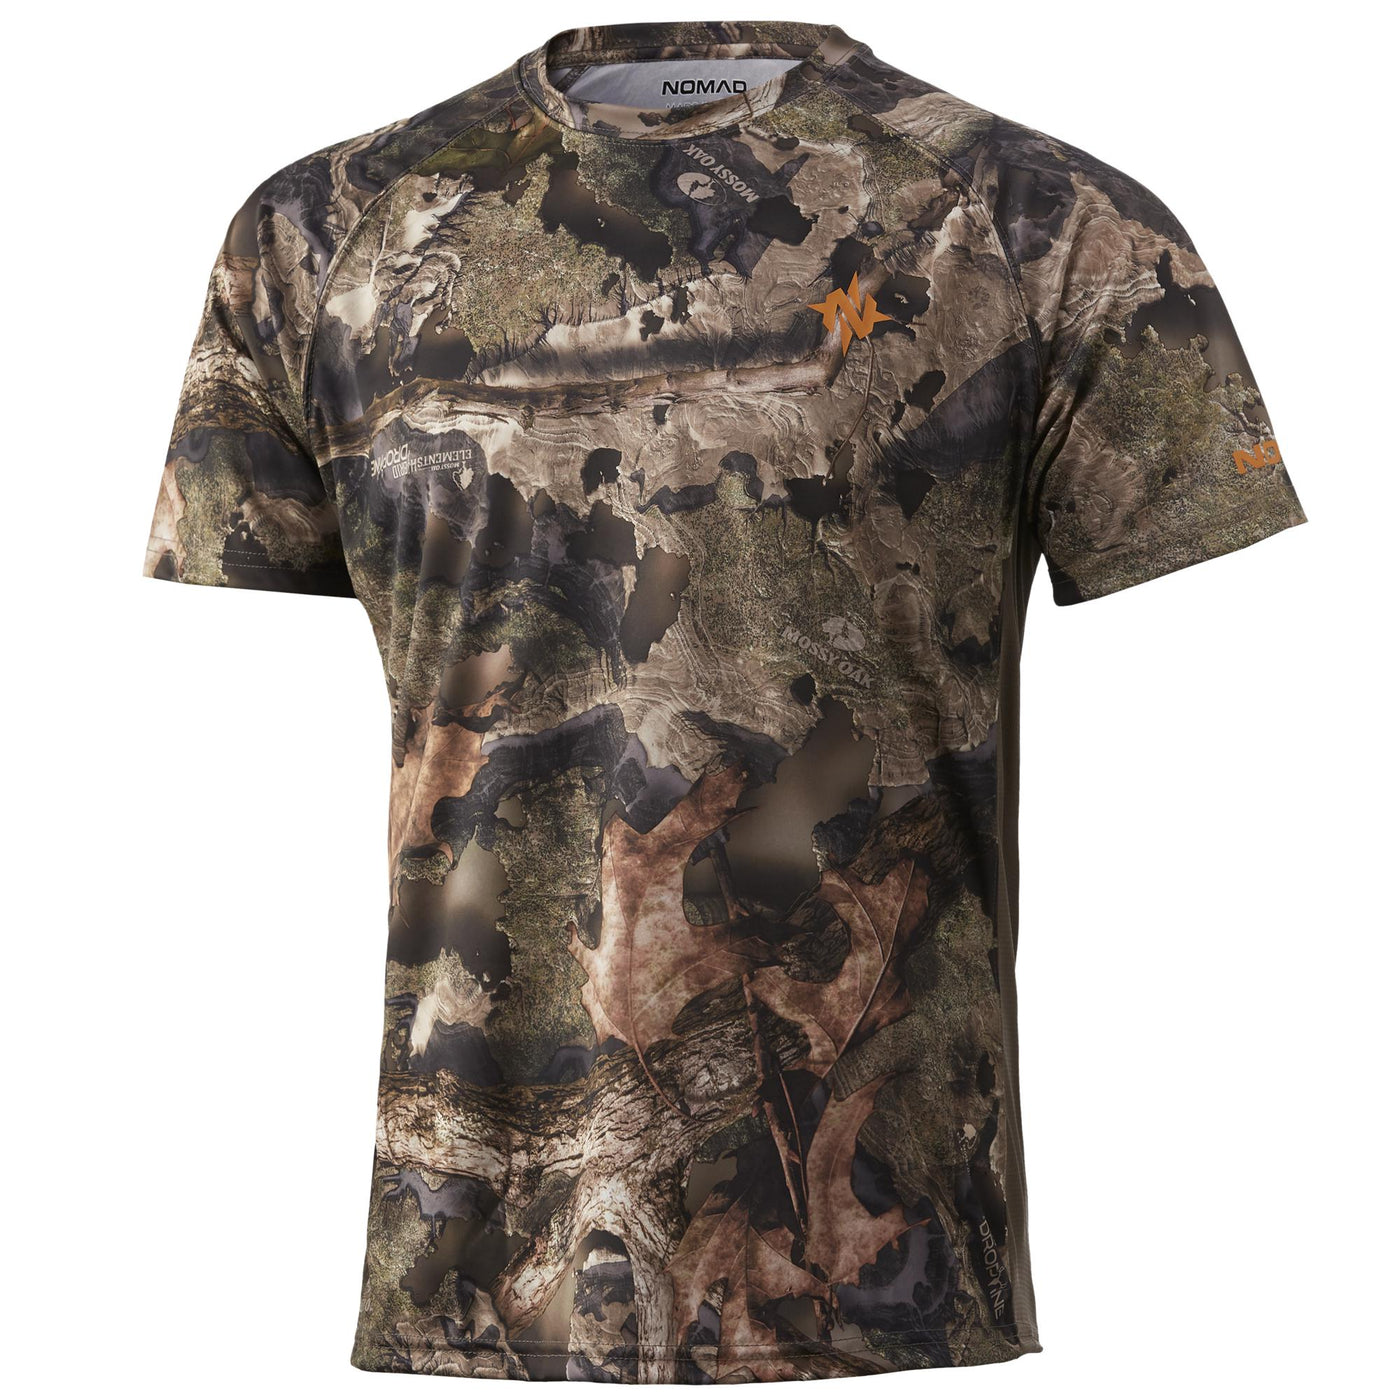 Nomad Pursuit ShortSleeve Shirt-HUNTING/OUTDOORS-Kevin's Fine Outdoor Gear & Apparel